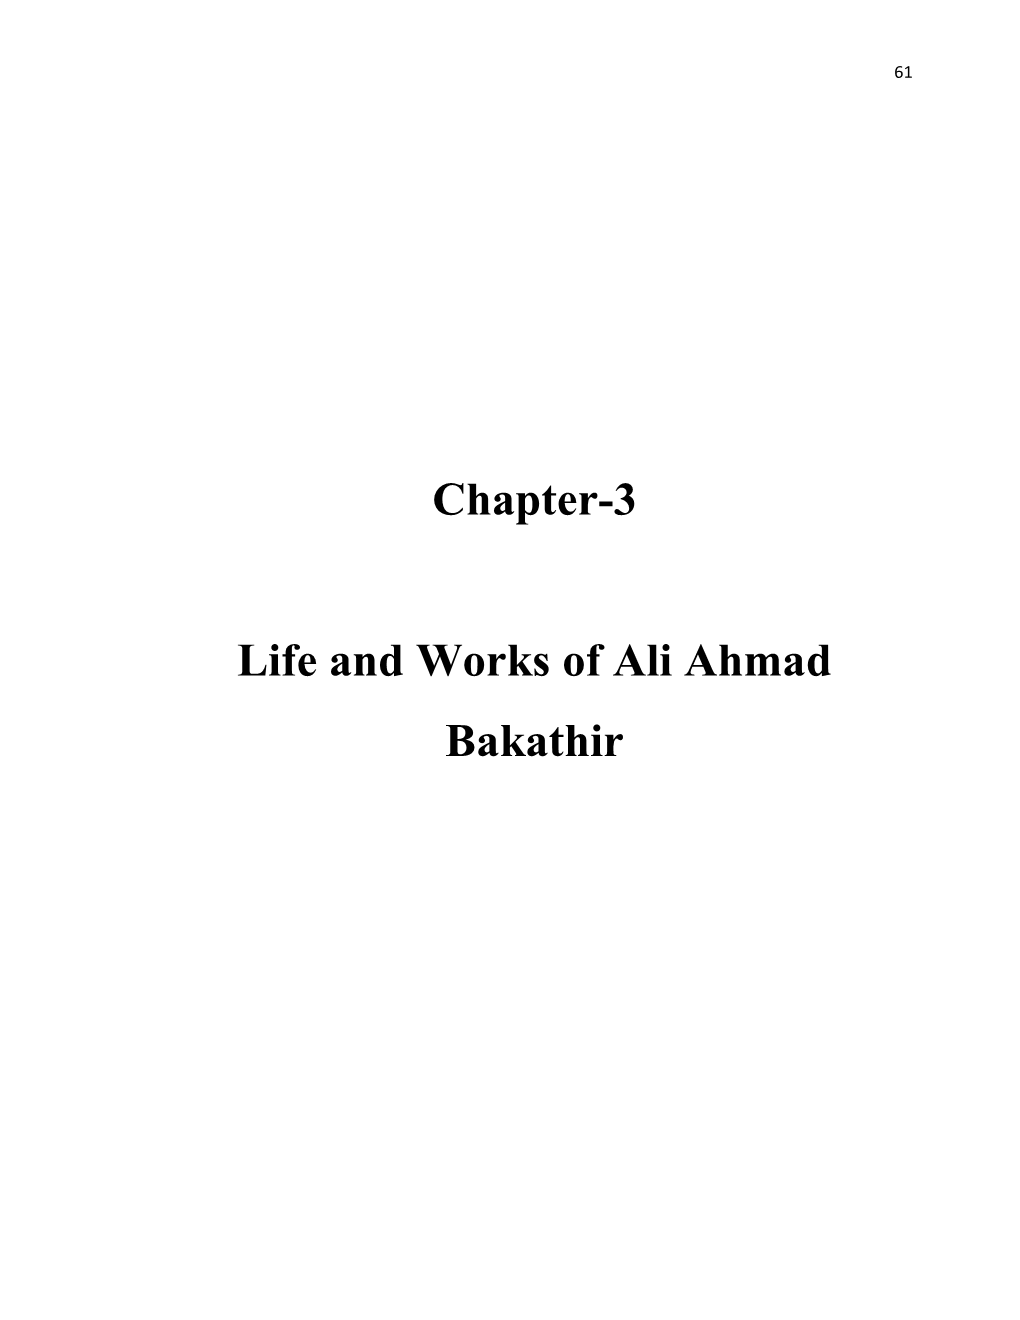 Chapter-3 Life and Works of Ali Ahmad Bakathir